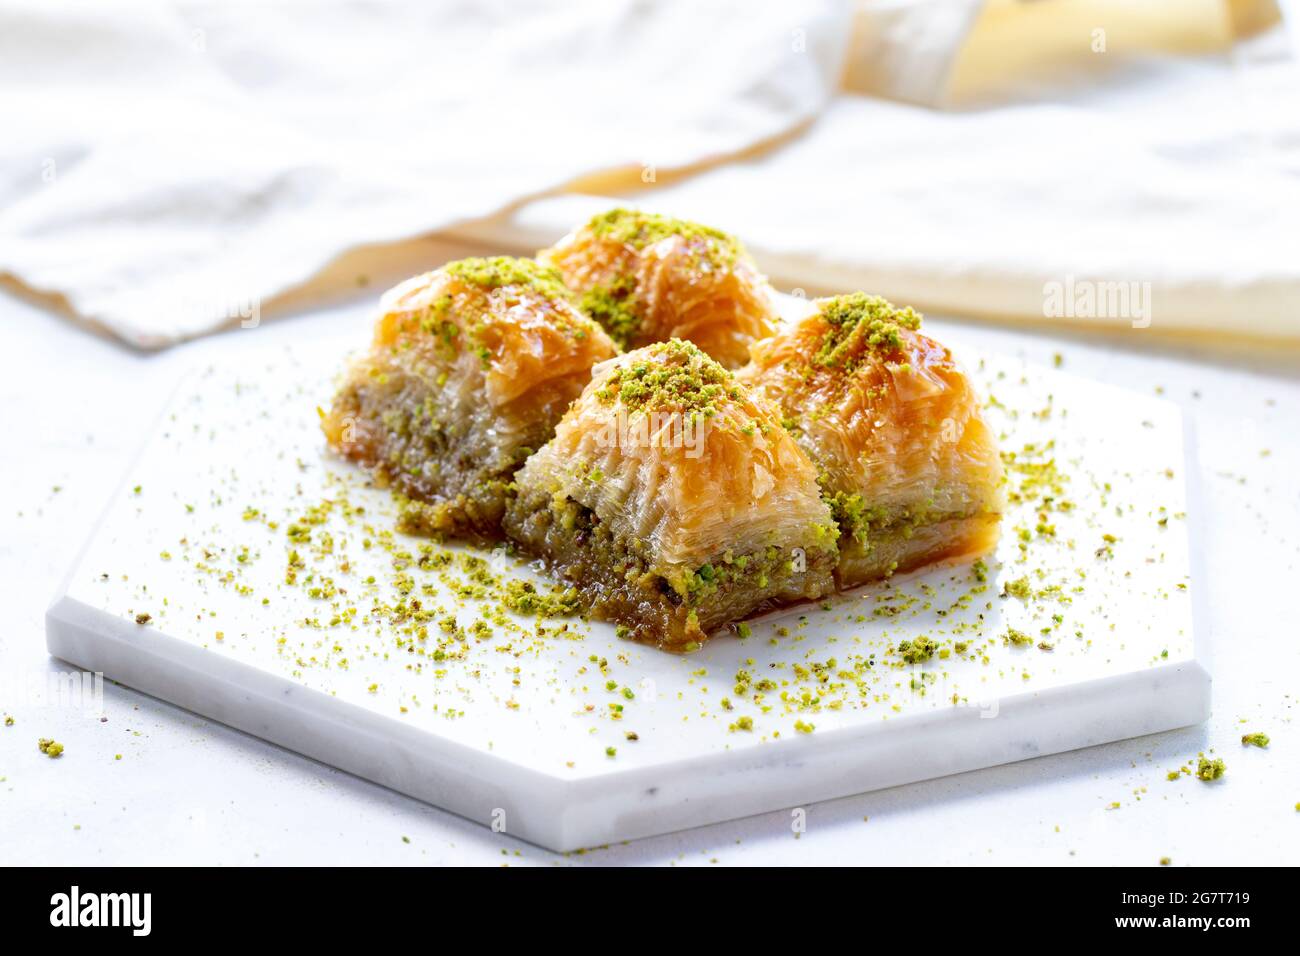 Baklava with pistachio on a white wooden background. Baklava on a marble floor Stock Photo